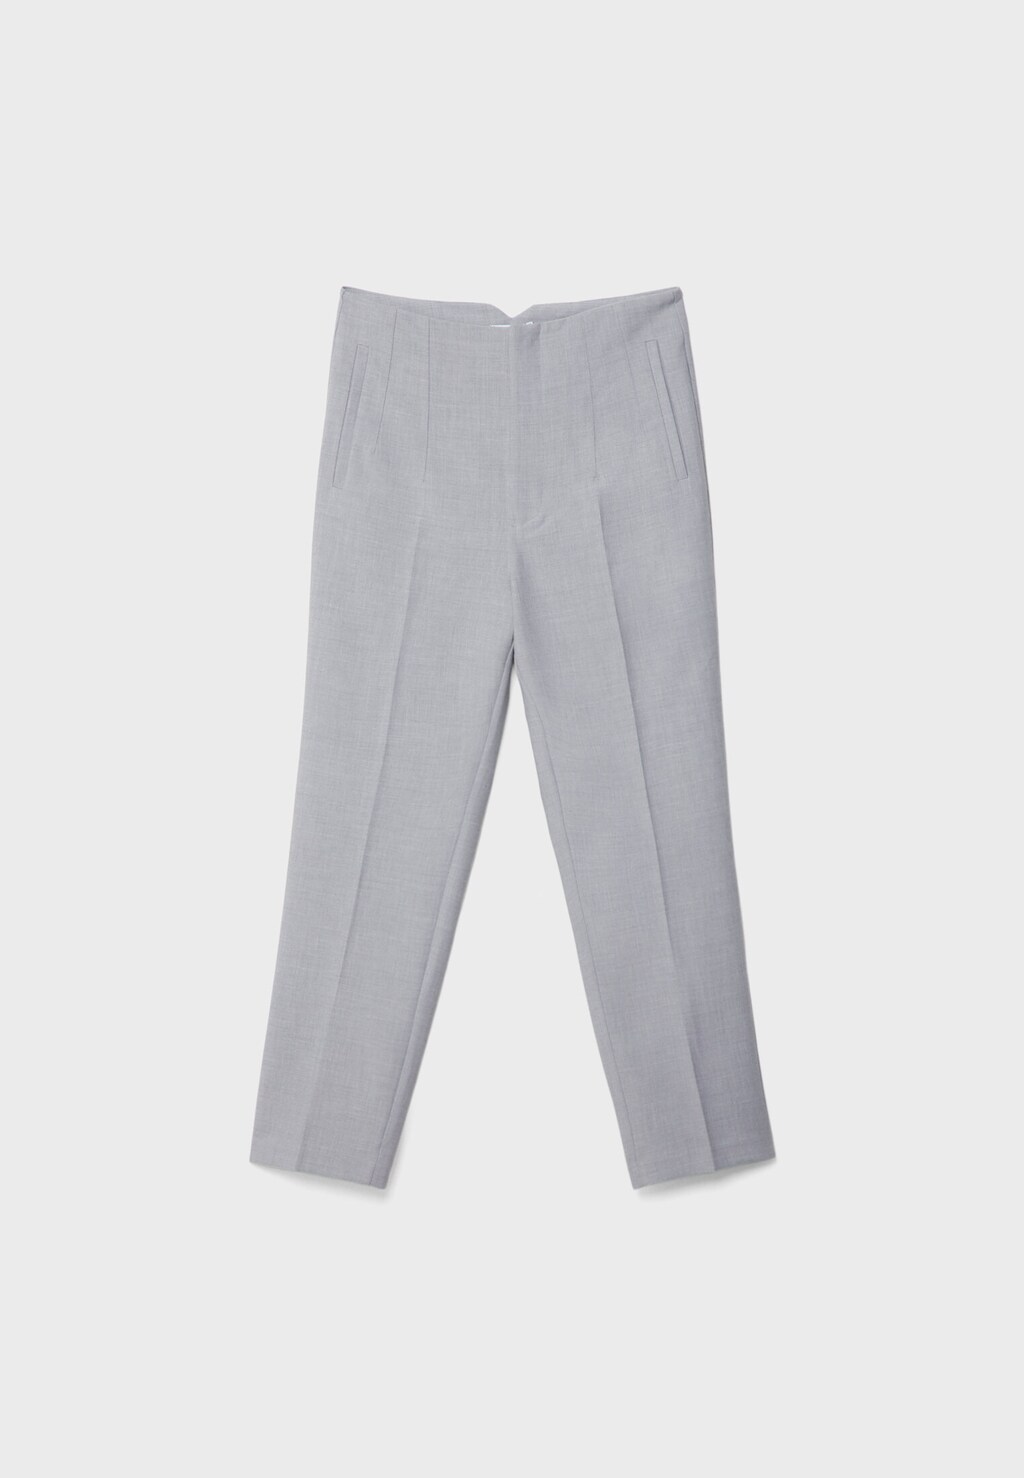 Smart trousers with seam detail - Women's fashion